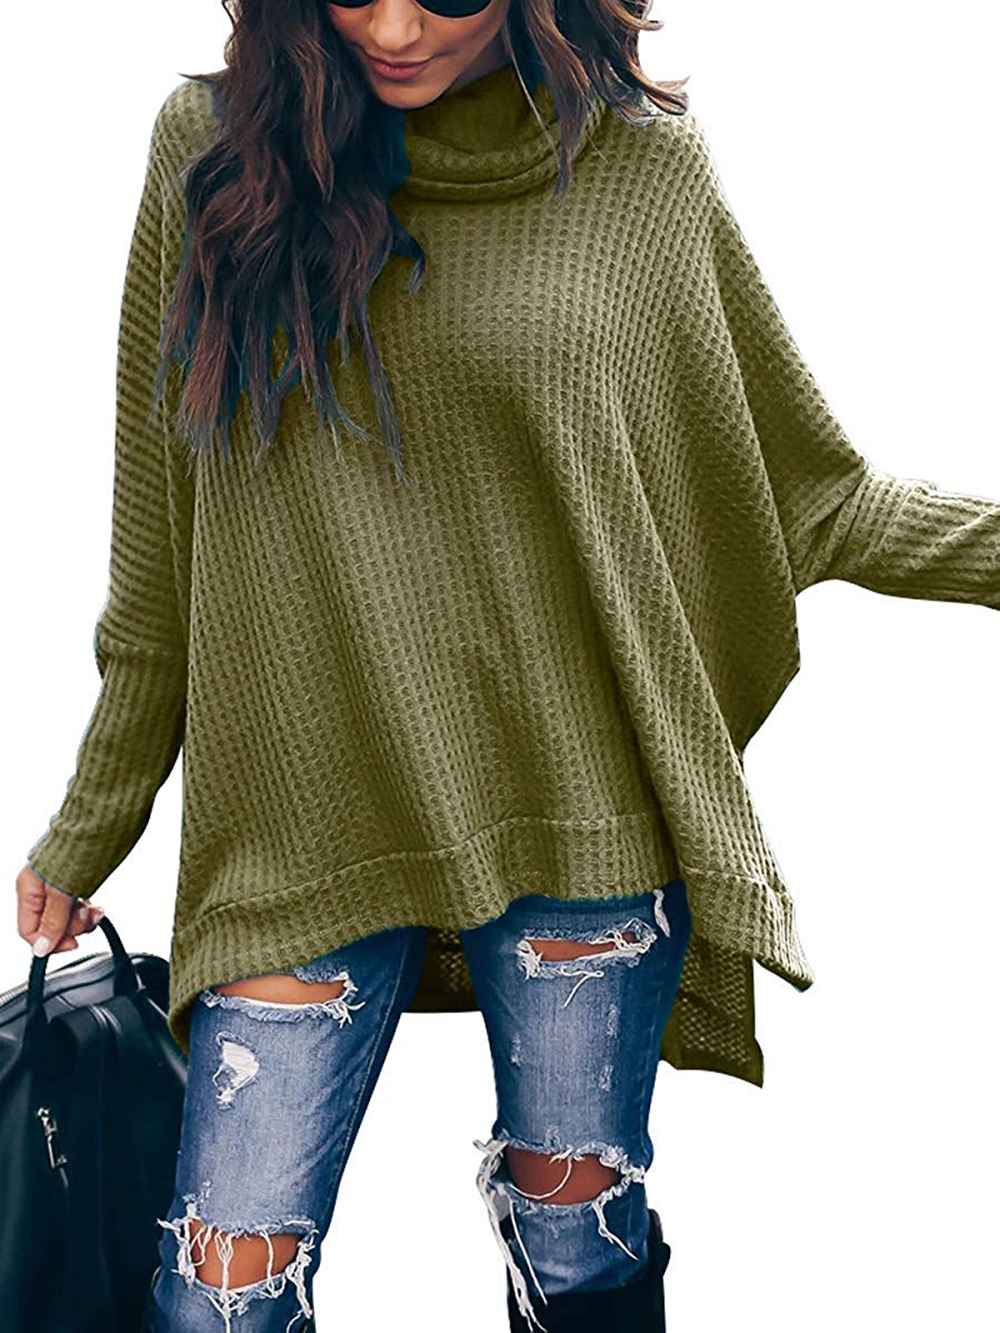 Caracilia Turtle Cowl NeckWaffle Knit Pullover Sweater